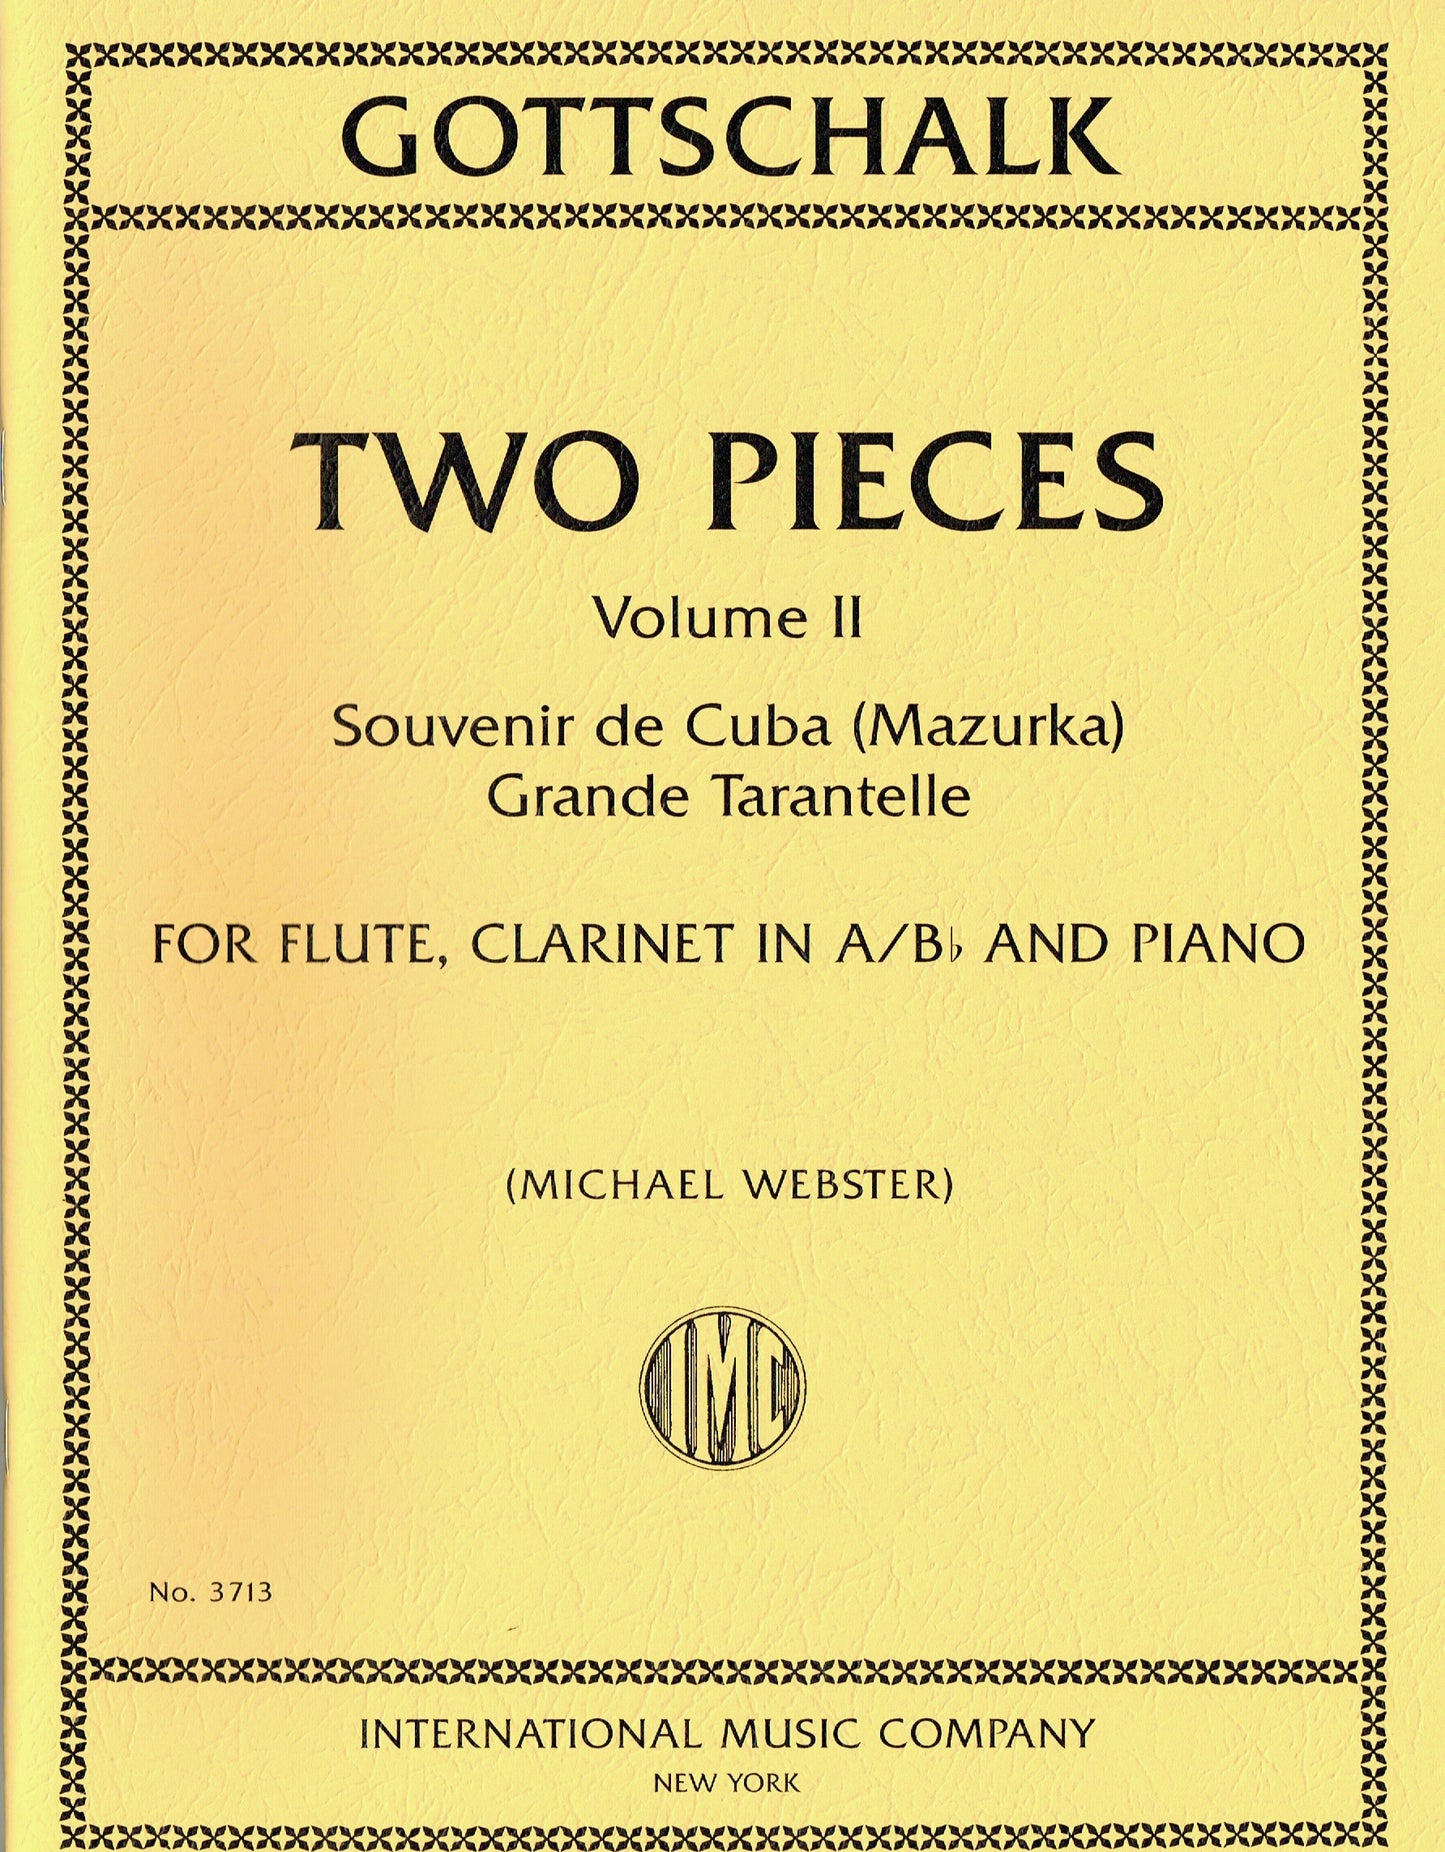 IMC Gottschalk Two Pieces Volume 2 For Flute Clarinet and Piano No. 3713